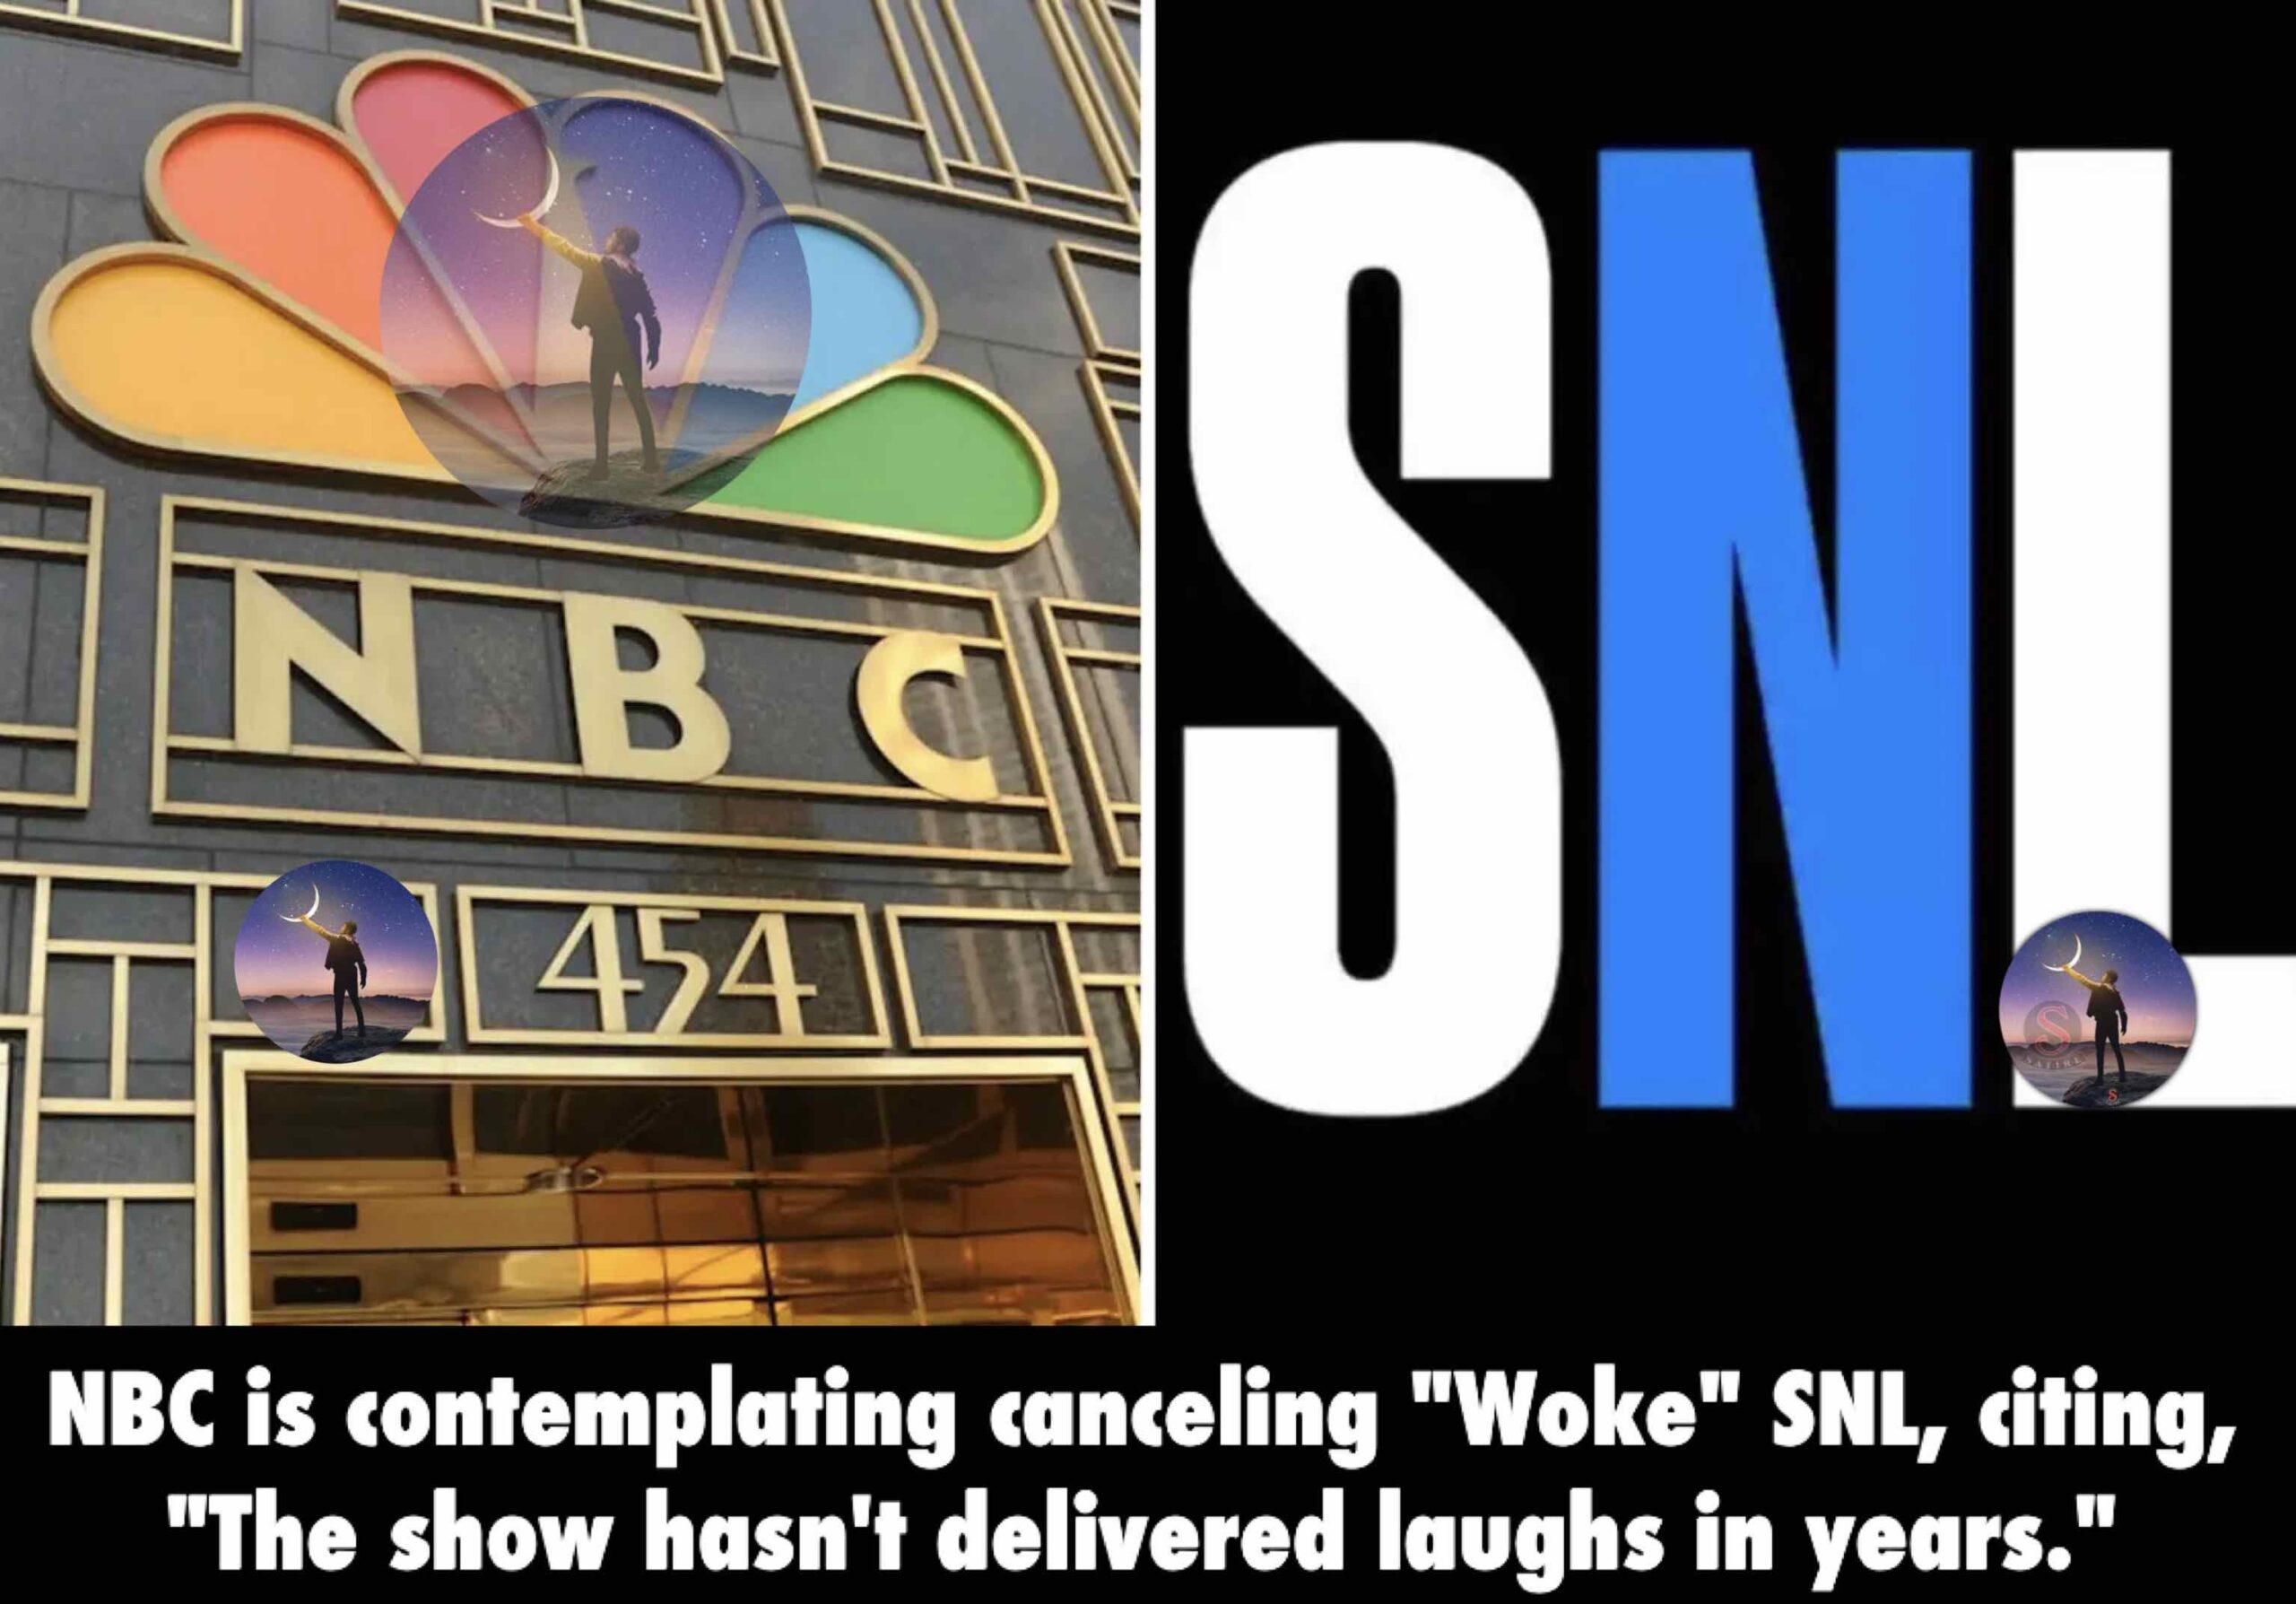 NBC is contemplating canceling “Woke” SNL, citing, “The show hasn’t delivered laughs in years.”